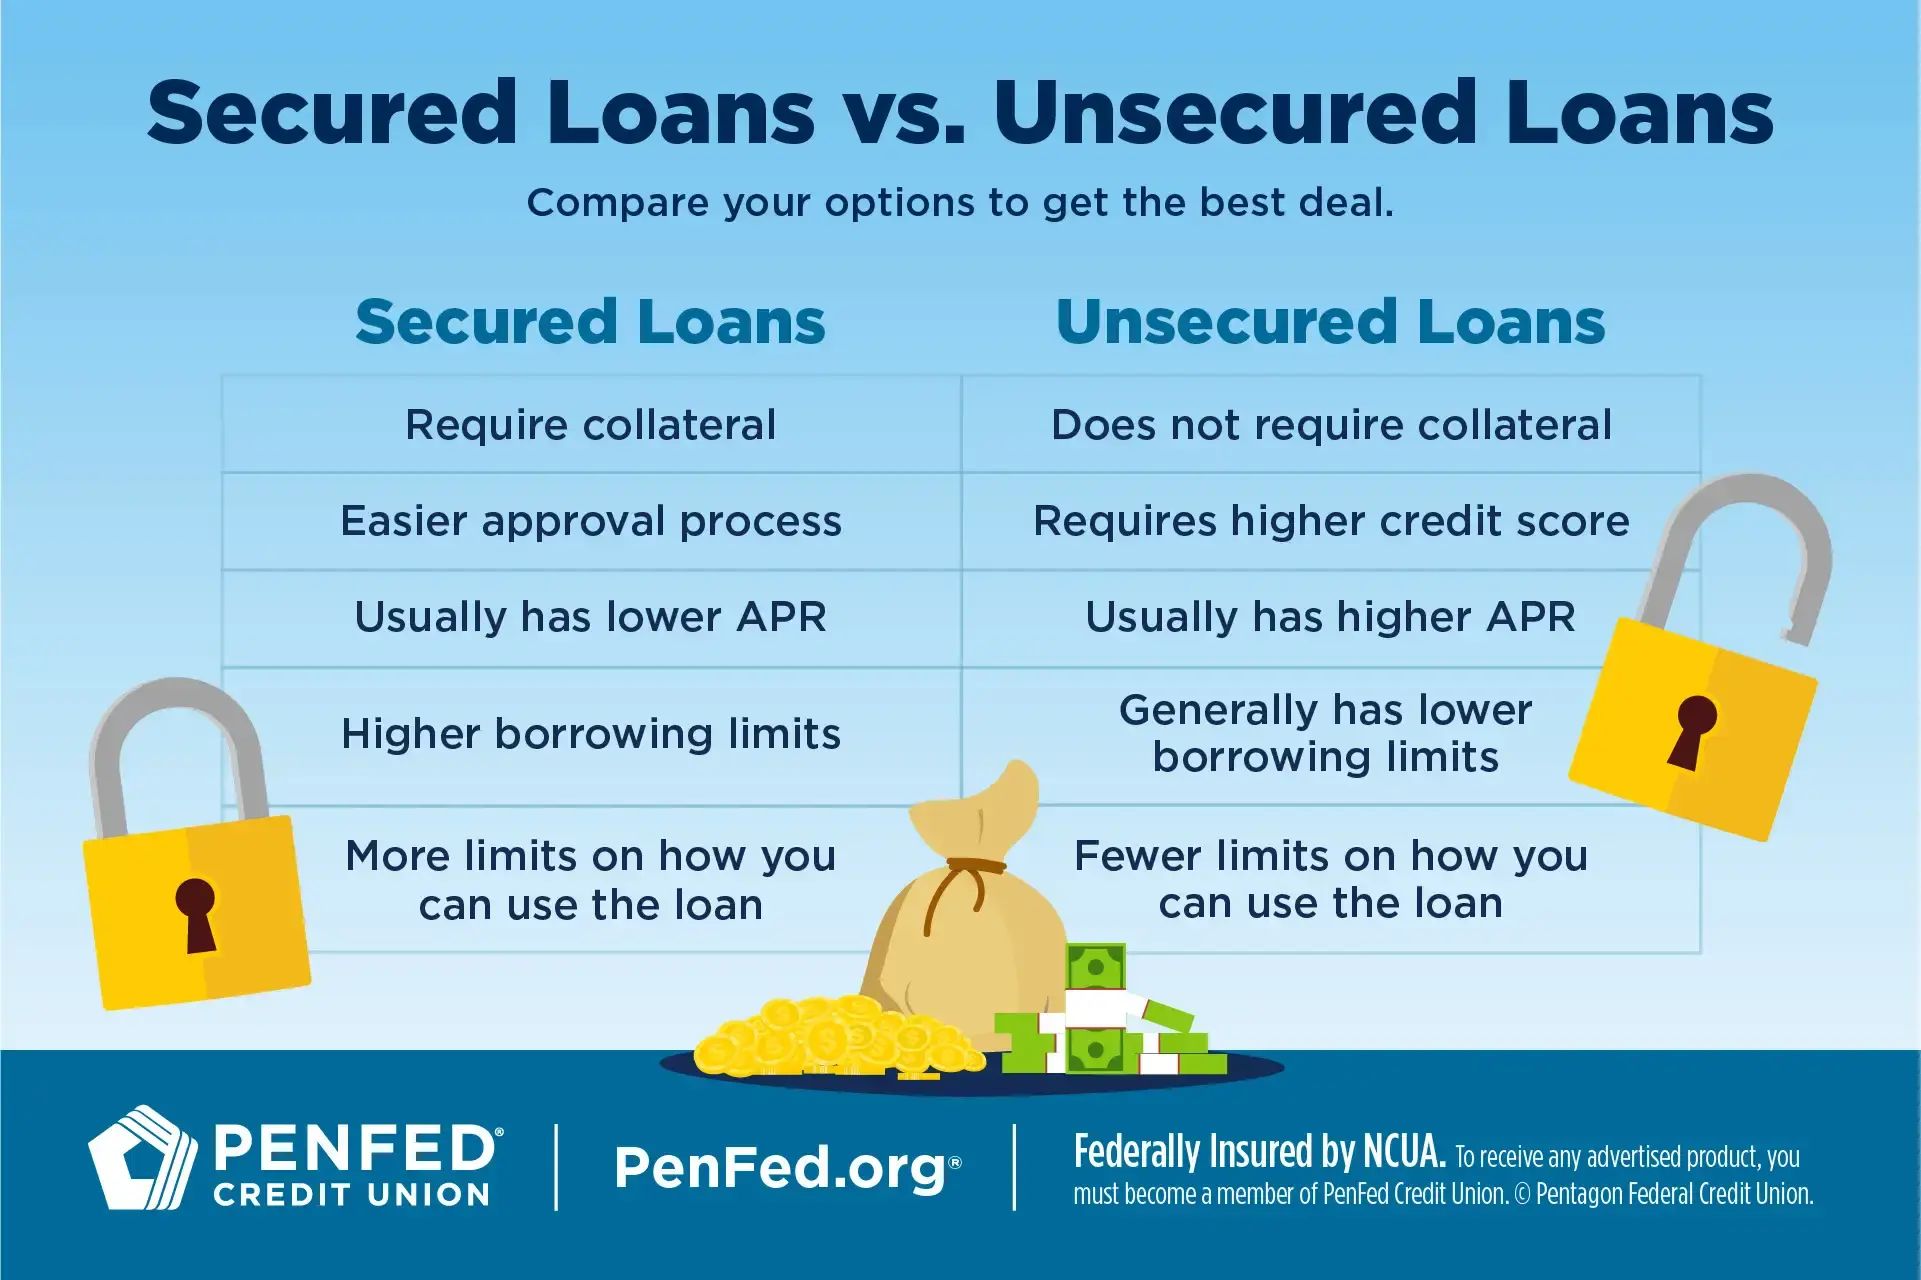 Are Personal Loans Secured or Unsecured?